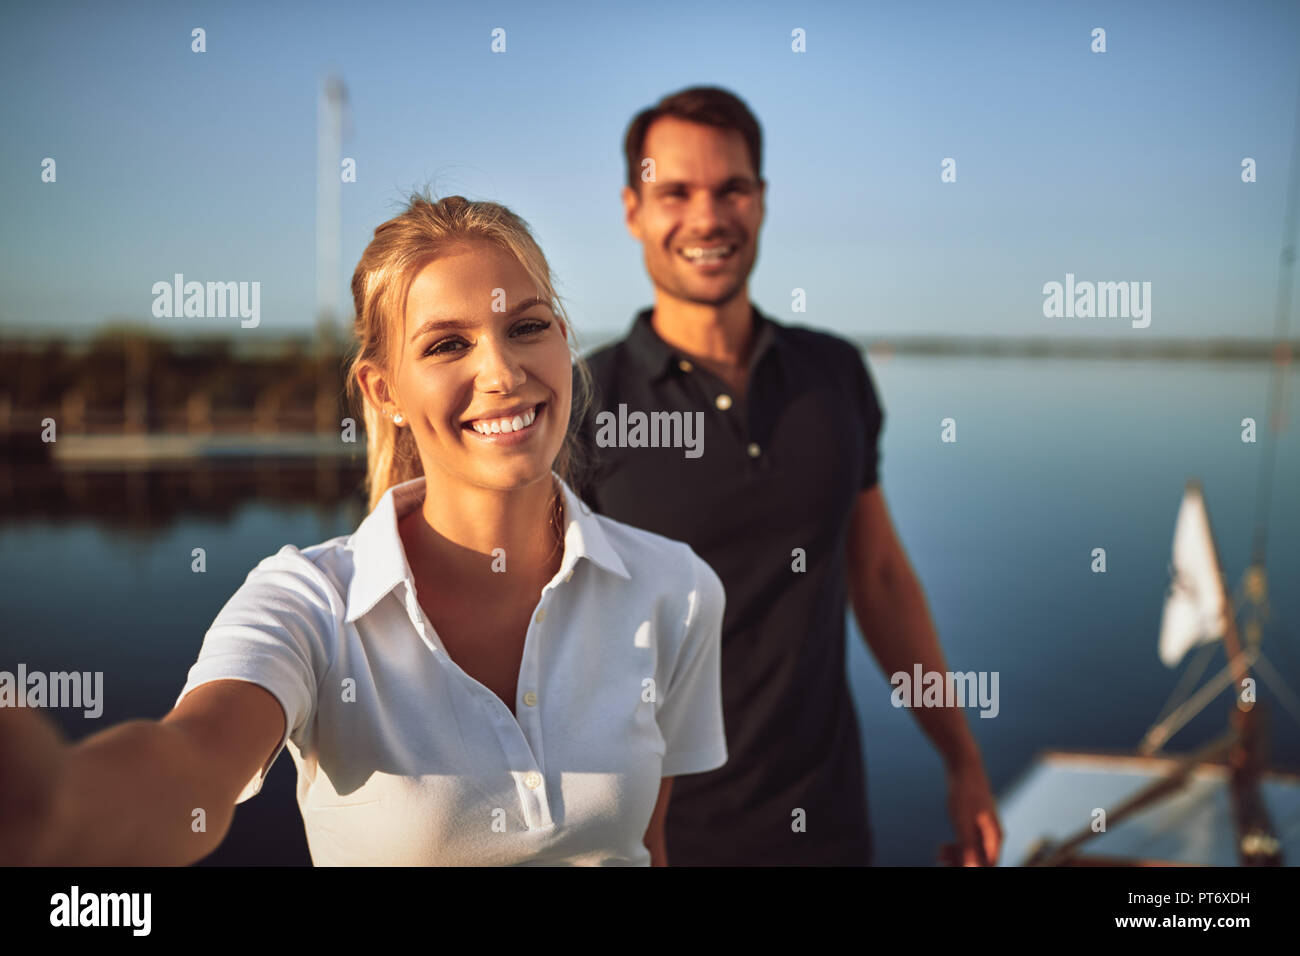 Smiling young couple standing together on the deck of a boat while enjoying a sunny day sailing Stock Photo